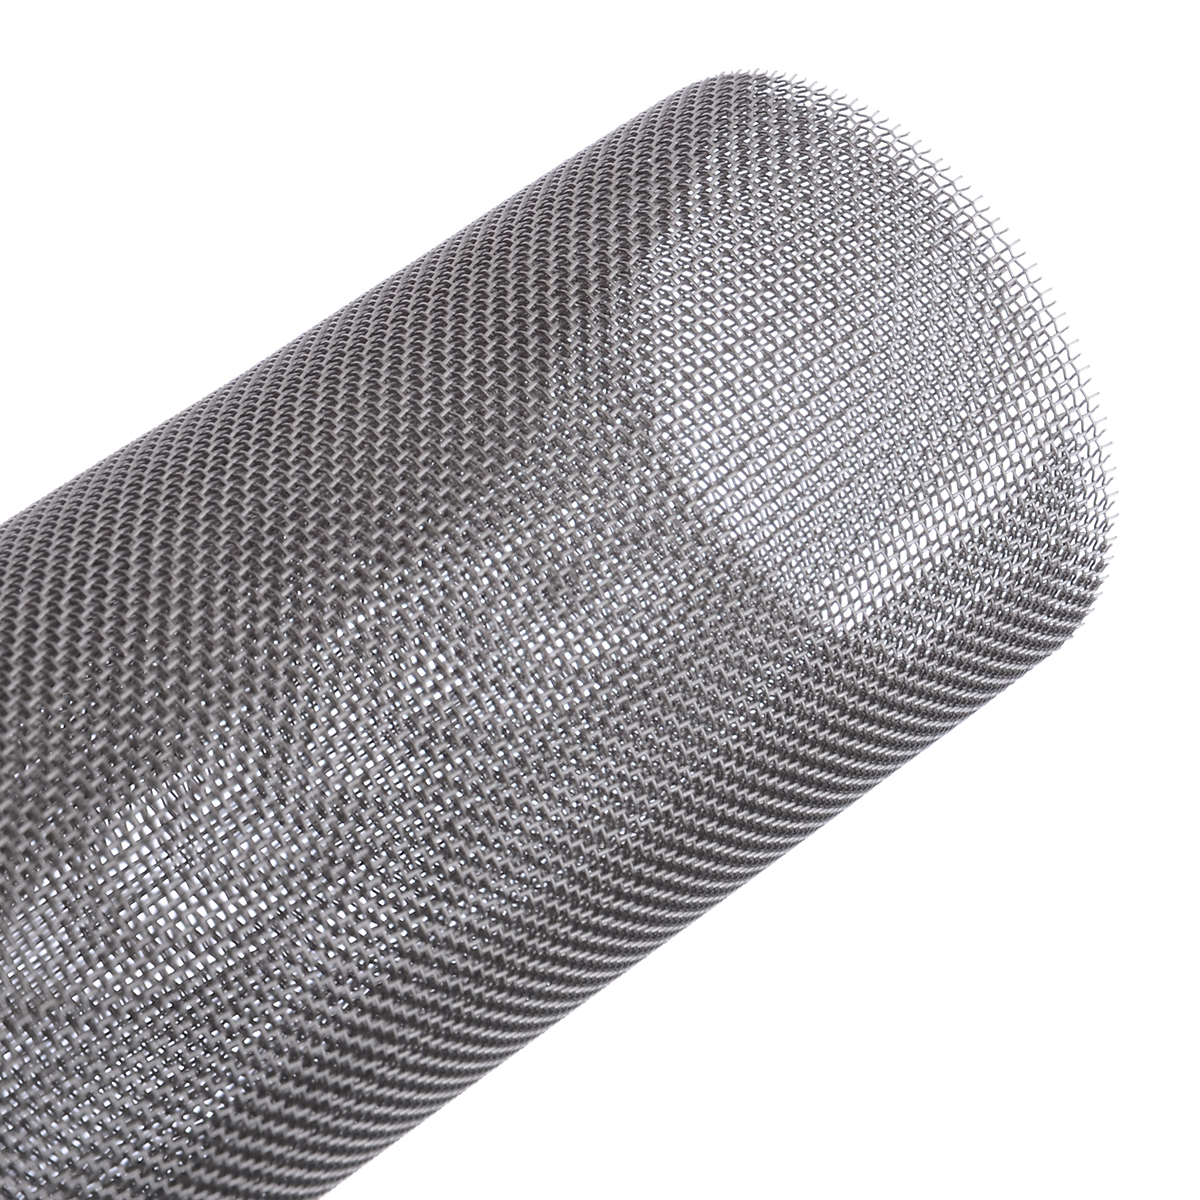 30*30cm Silver 30 Mesh 600 Micron Stainless Steel Filter Filtration Woven Wire Screen For Industrial Tools